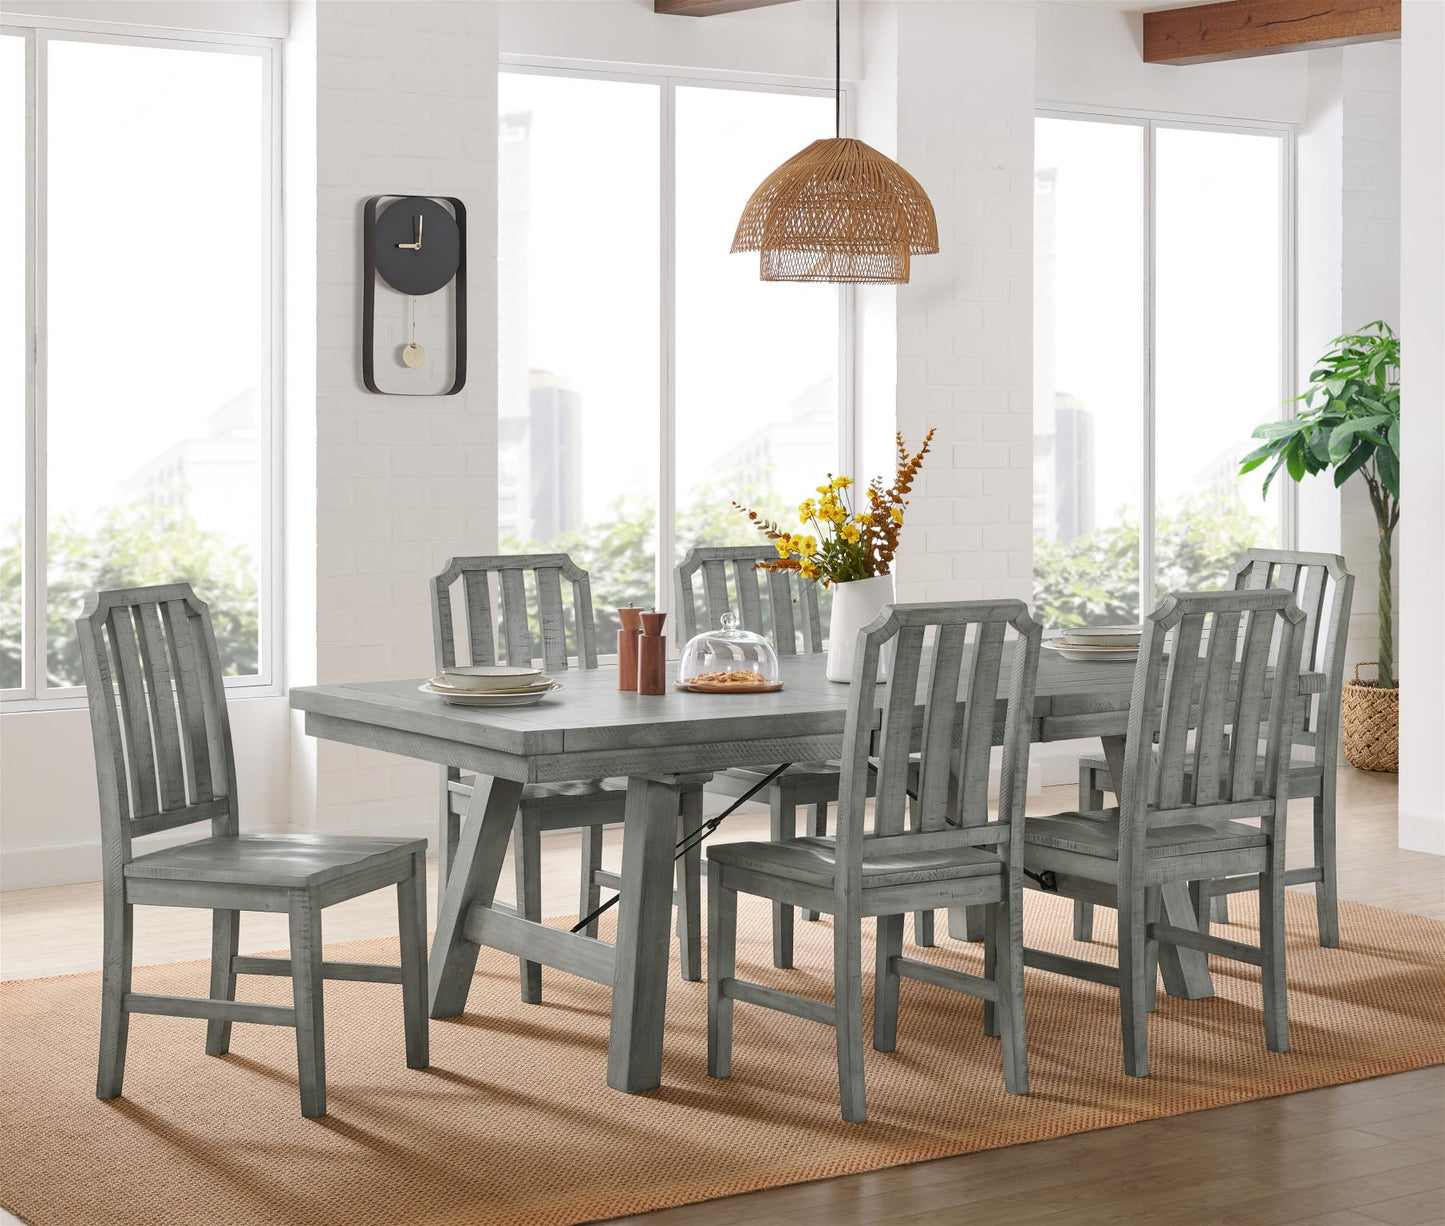 Beach House 6 Pc Dining Collection by Martin Svensson